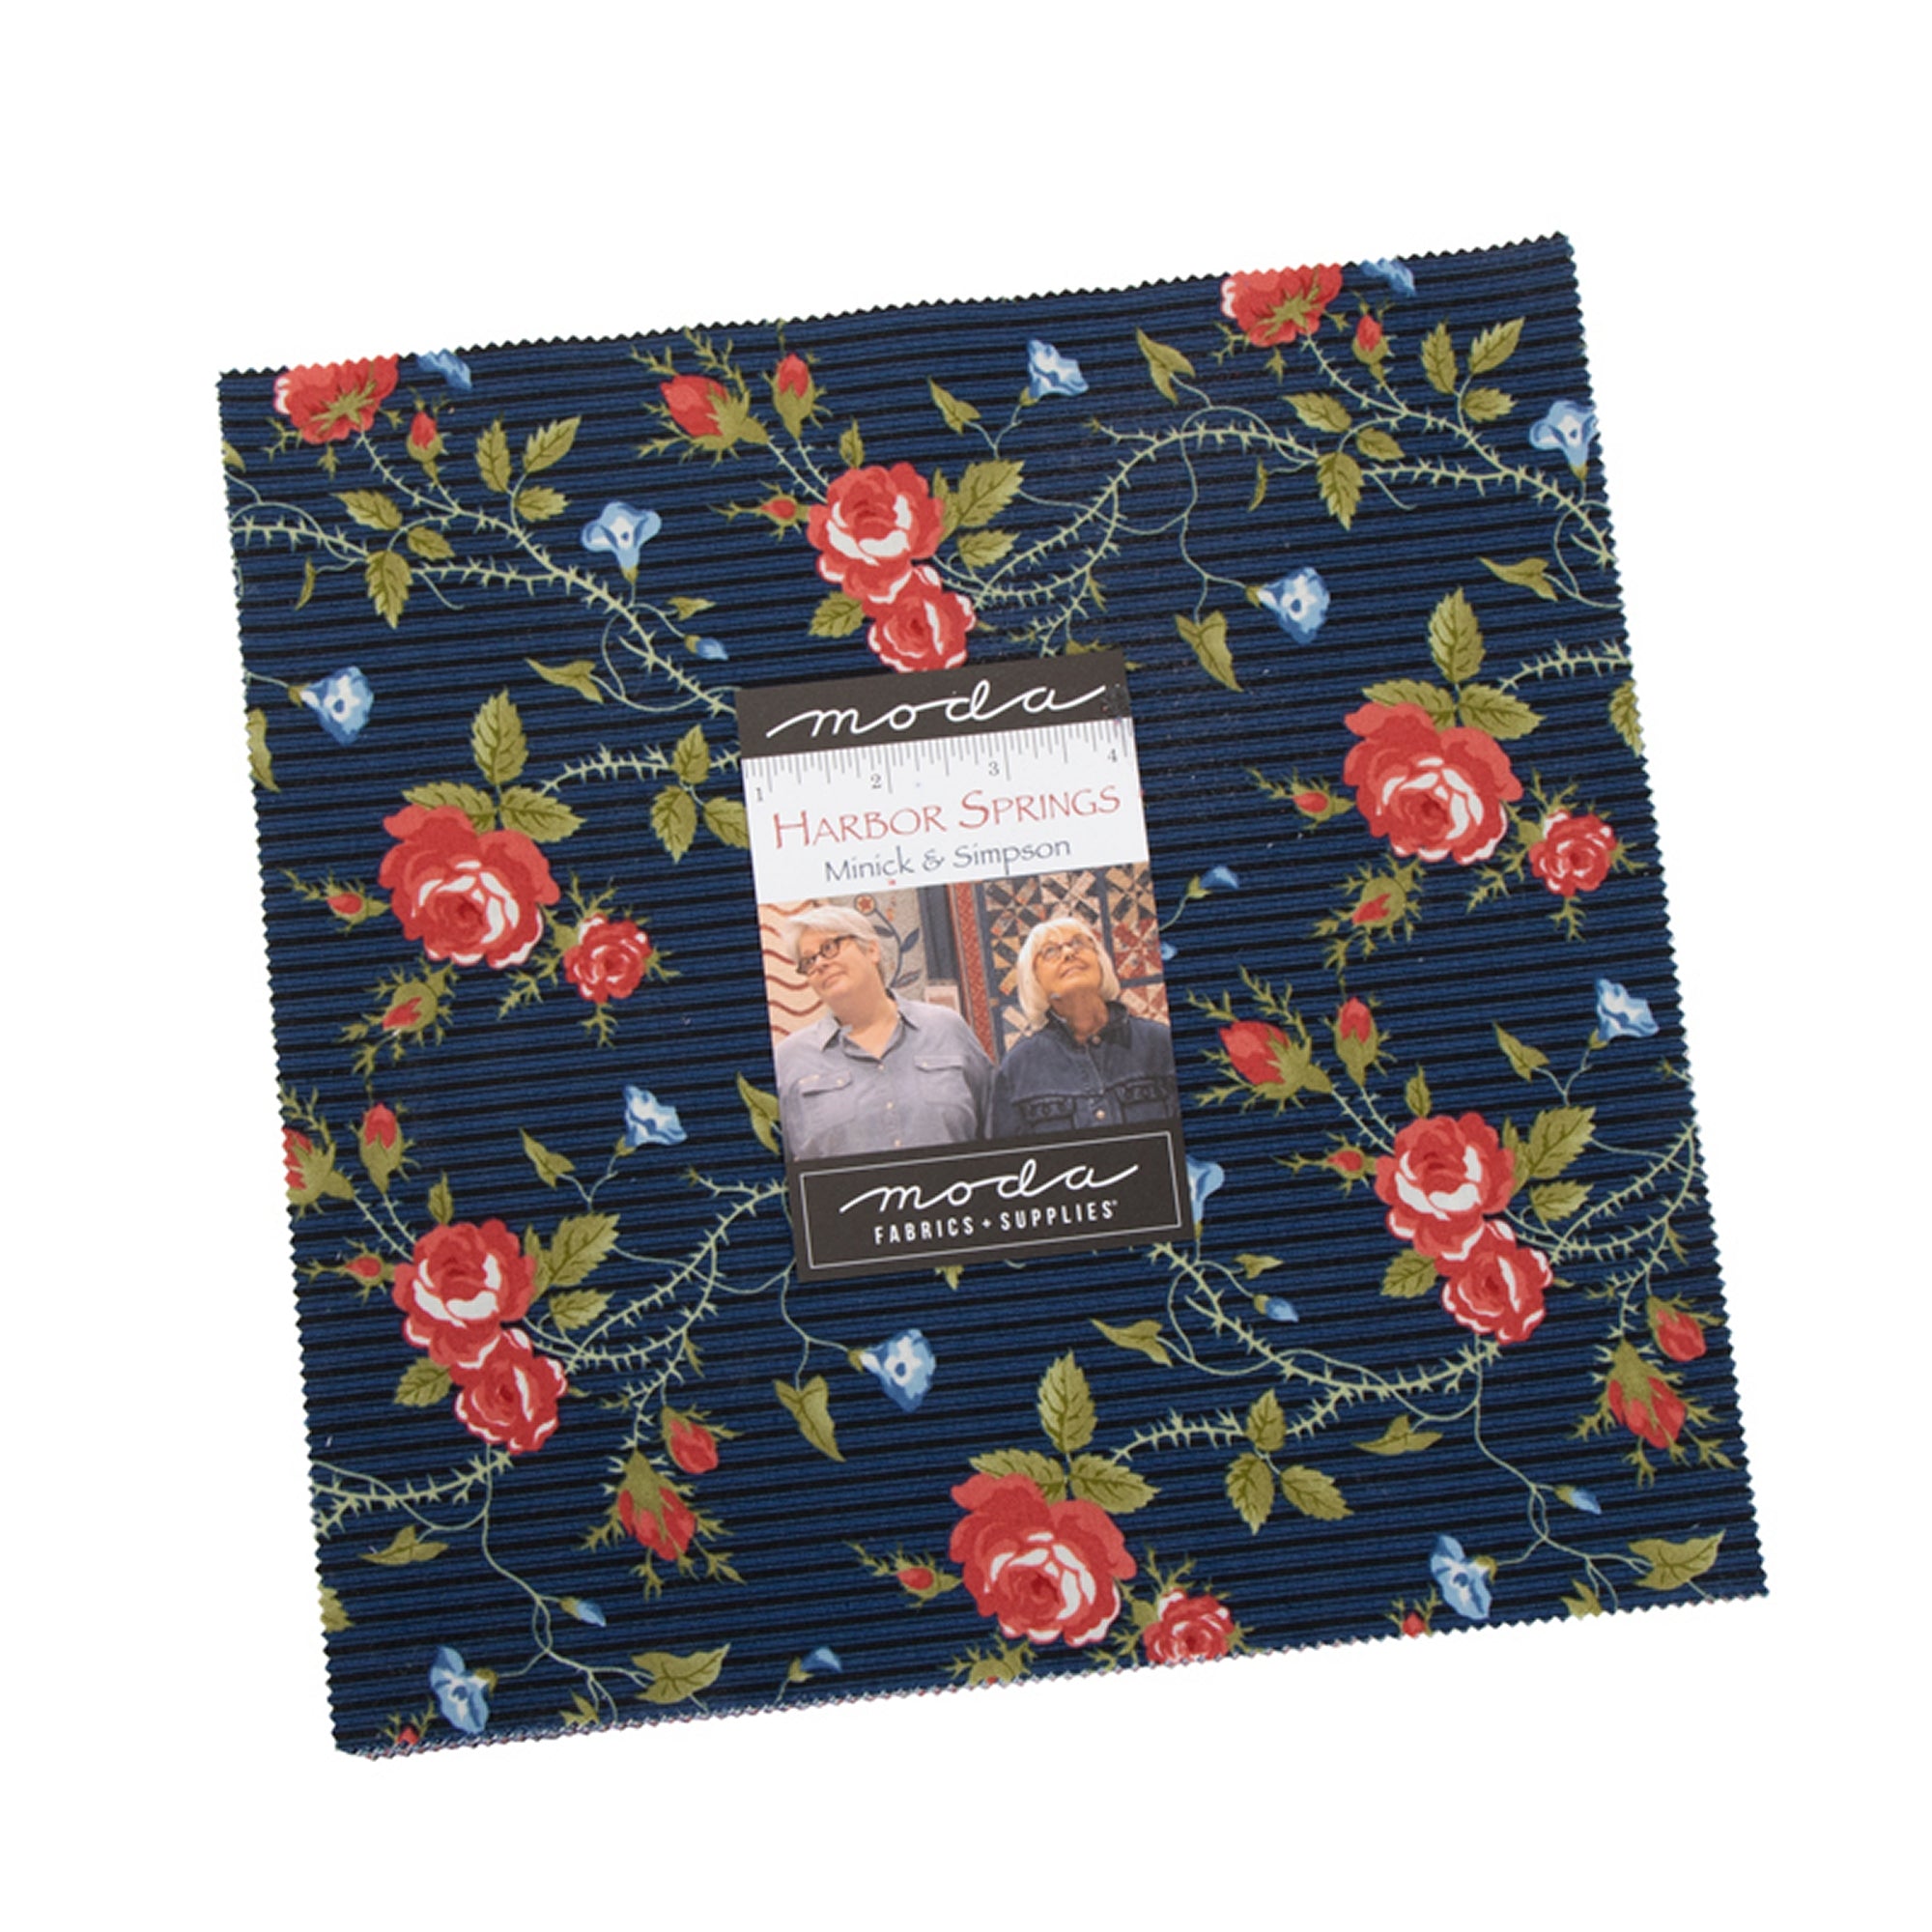 HARBOR SPRINGS - MINI Charm Pack - 14900 - Minick & Simpson - Moda - R – We  Do Quilts